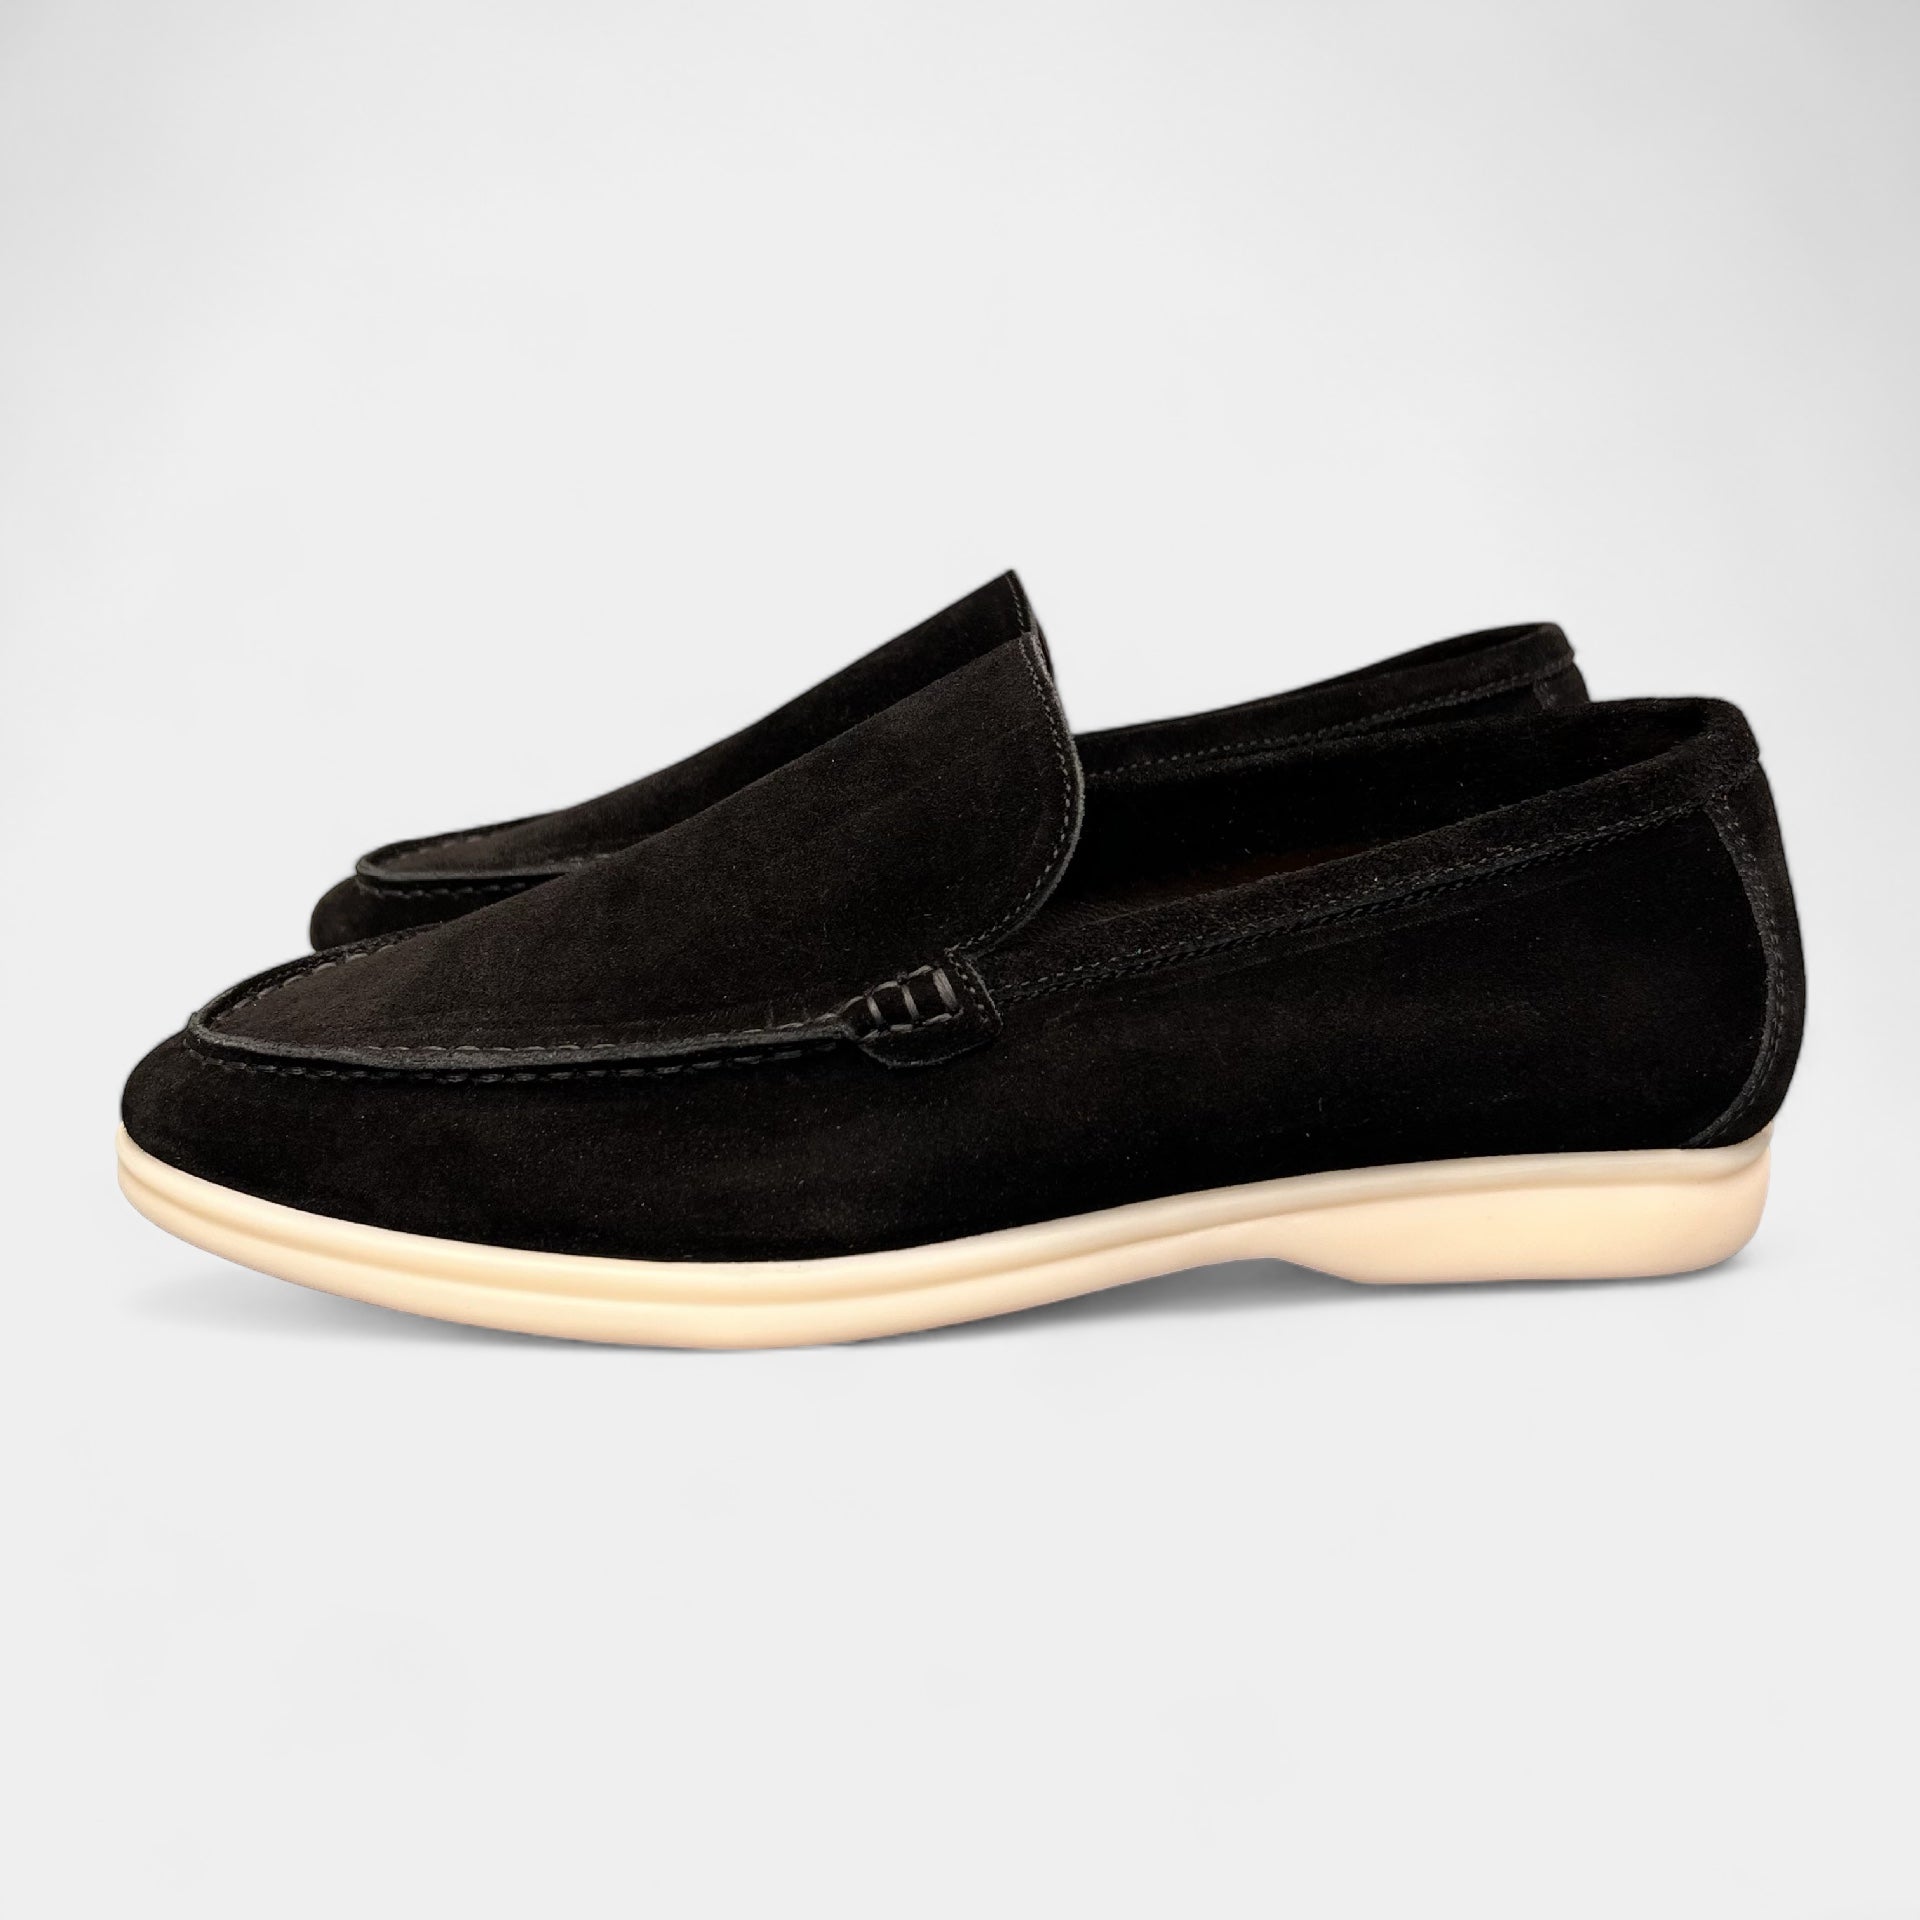 OLD MONEY SUEDE Loafers - WEAR OLD MONEY